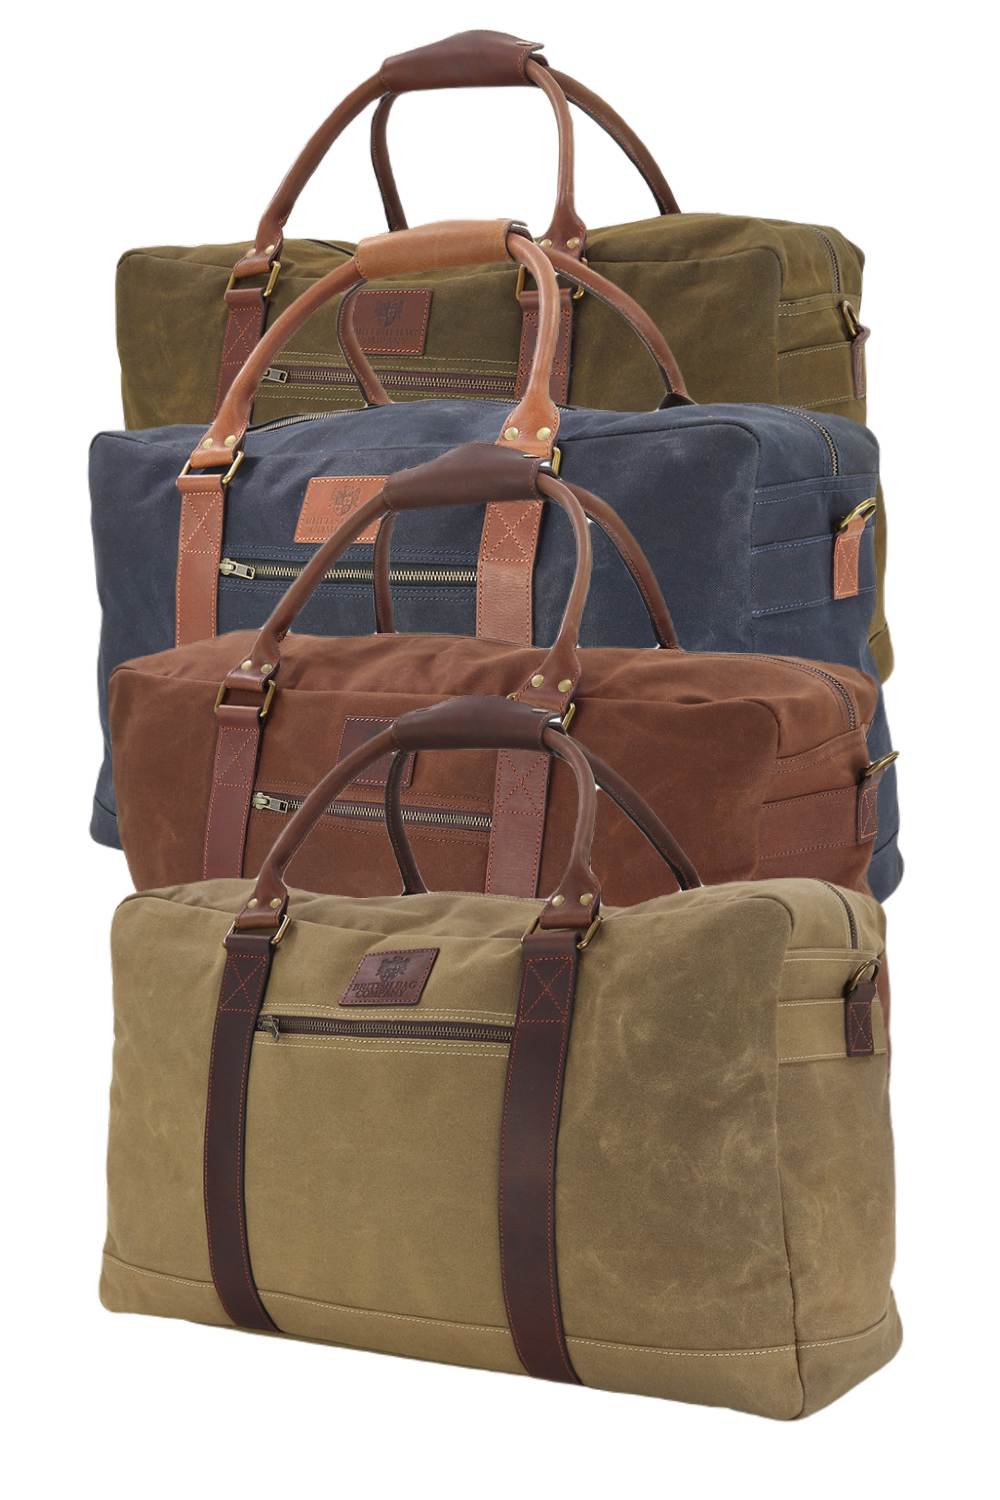 The British Bag Co. Waxed Canvas Holdall